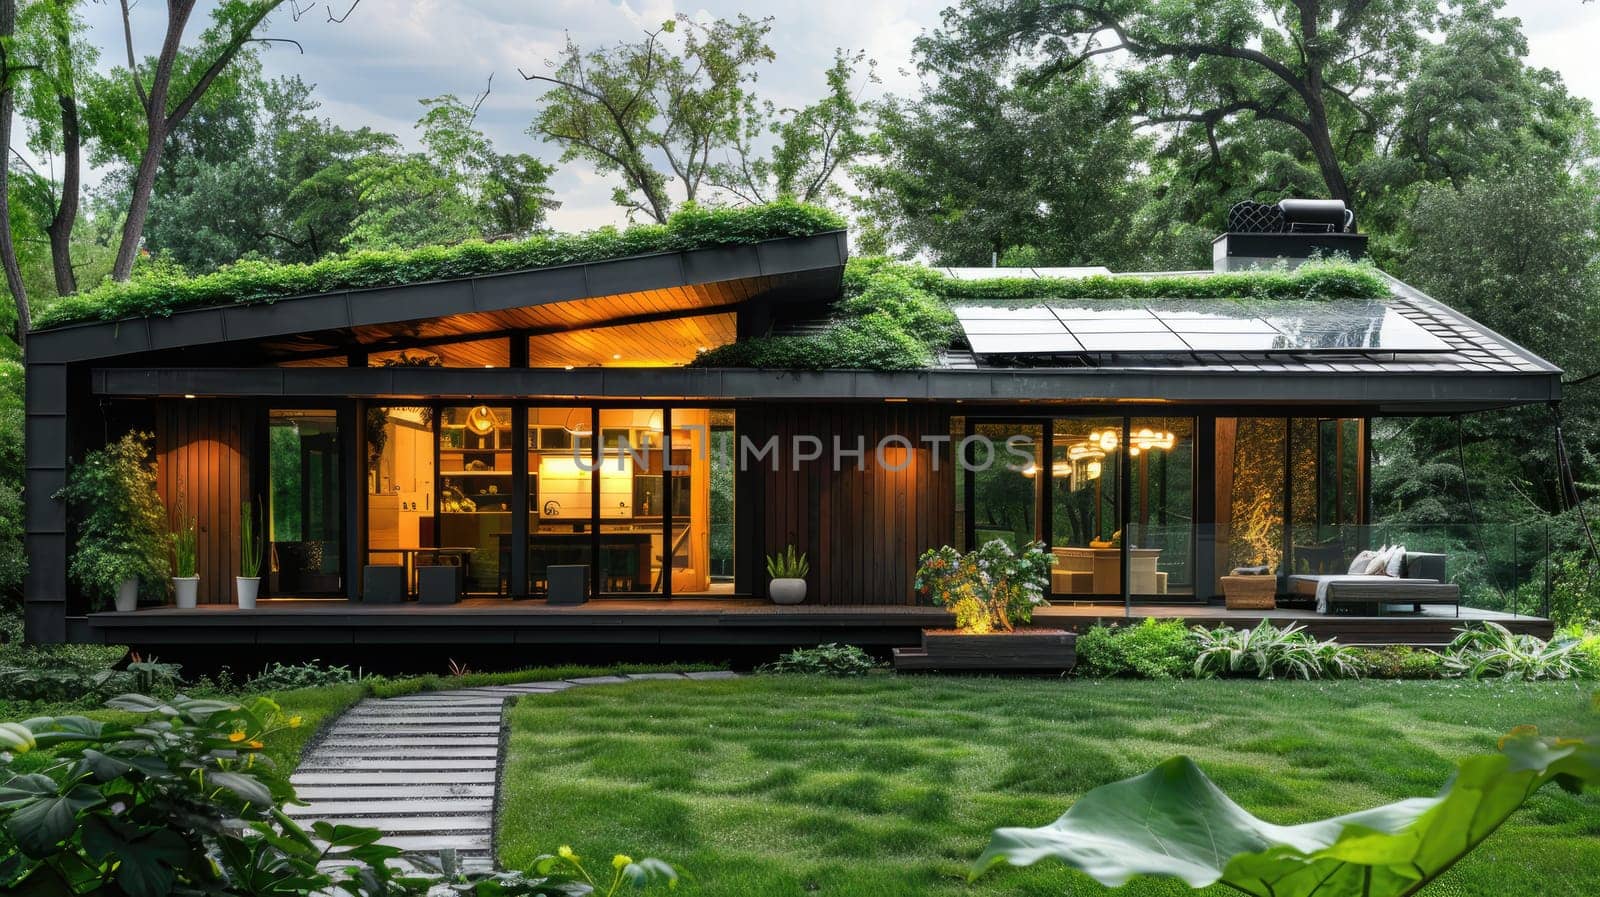 Modern Eco-Friendly Home with Green Roof, Solar Panels, and Sustainable Garden Views.